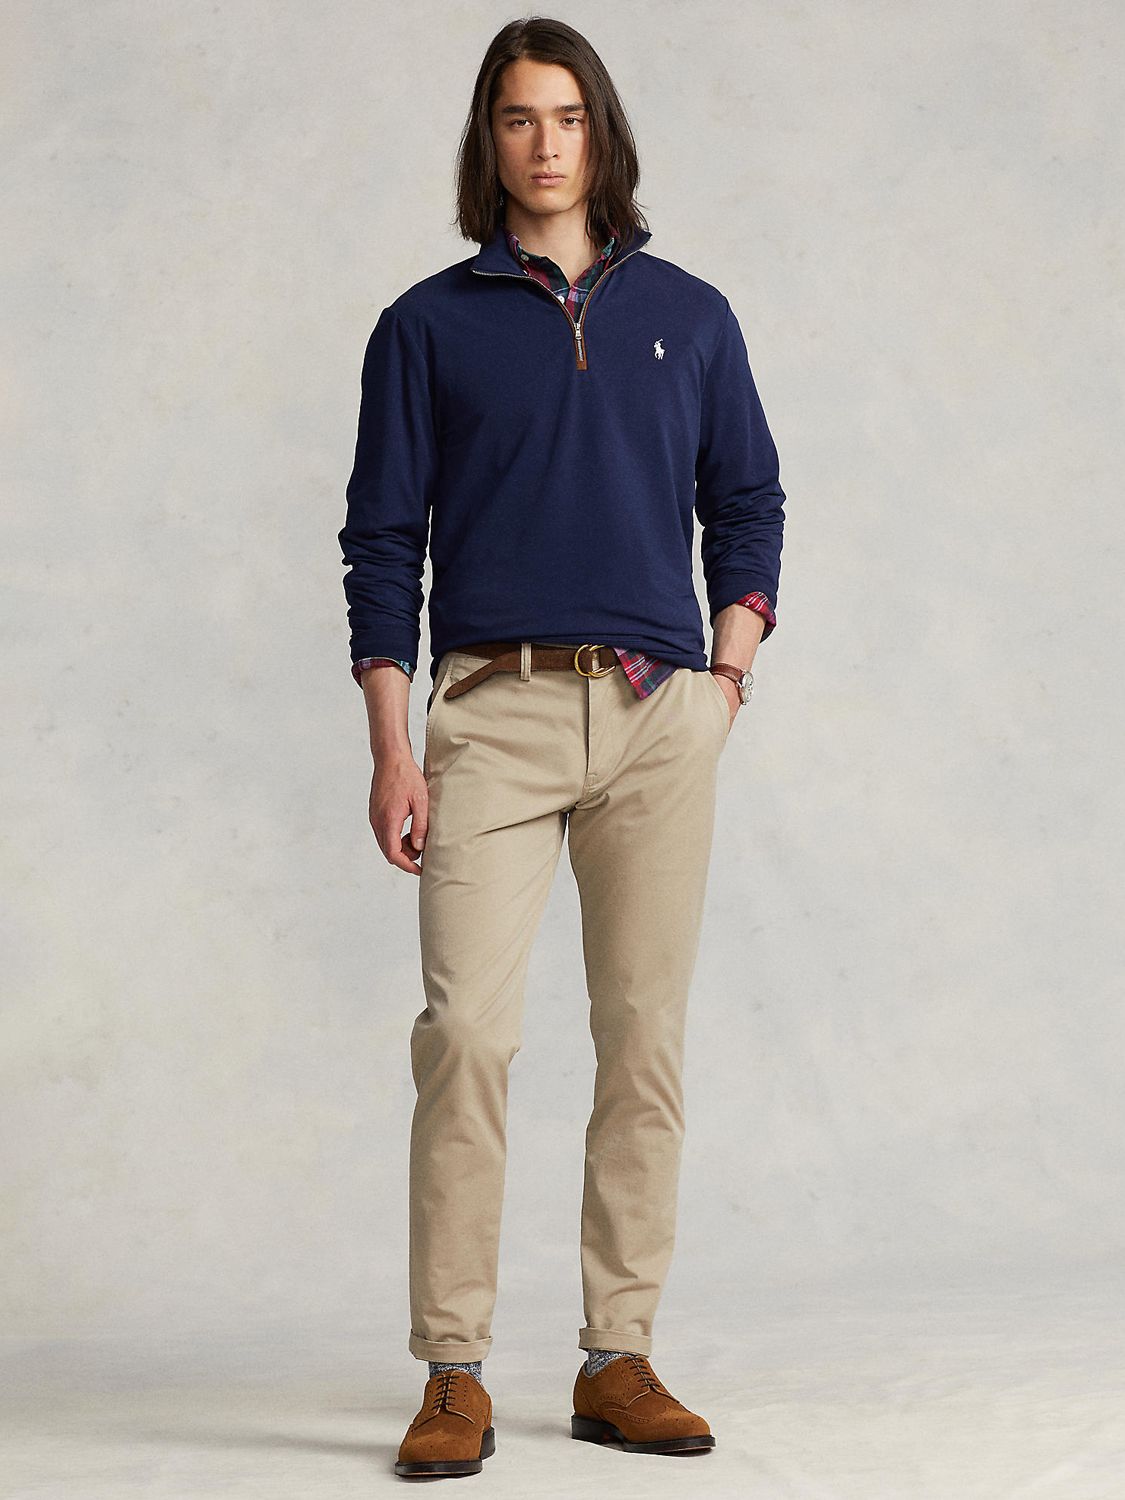 Polo Golf by Ralph Lauren Sweatshirt, French Navy at John Lewis & Partners